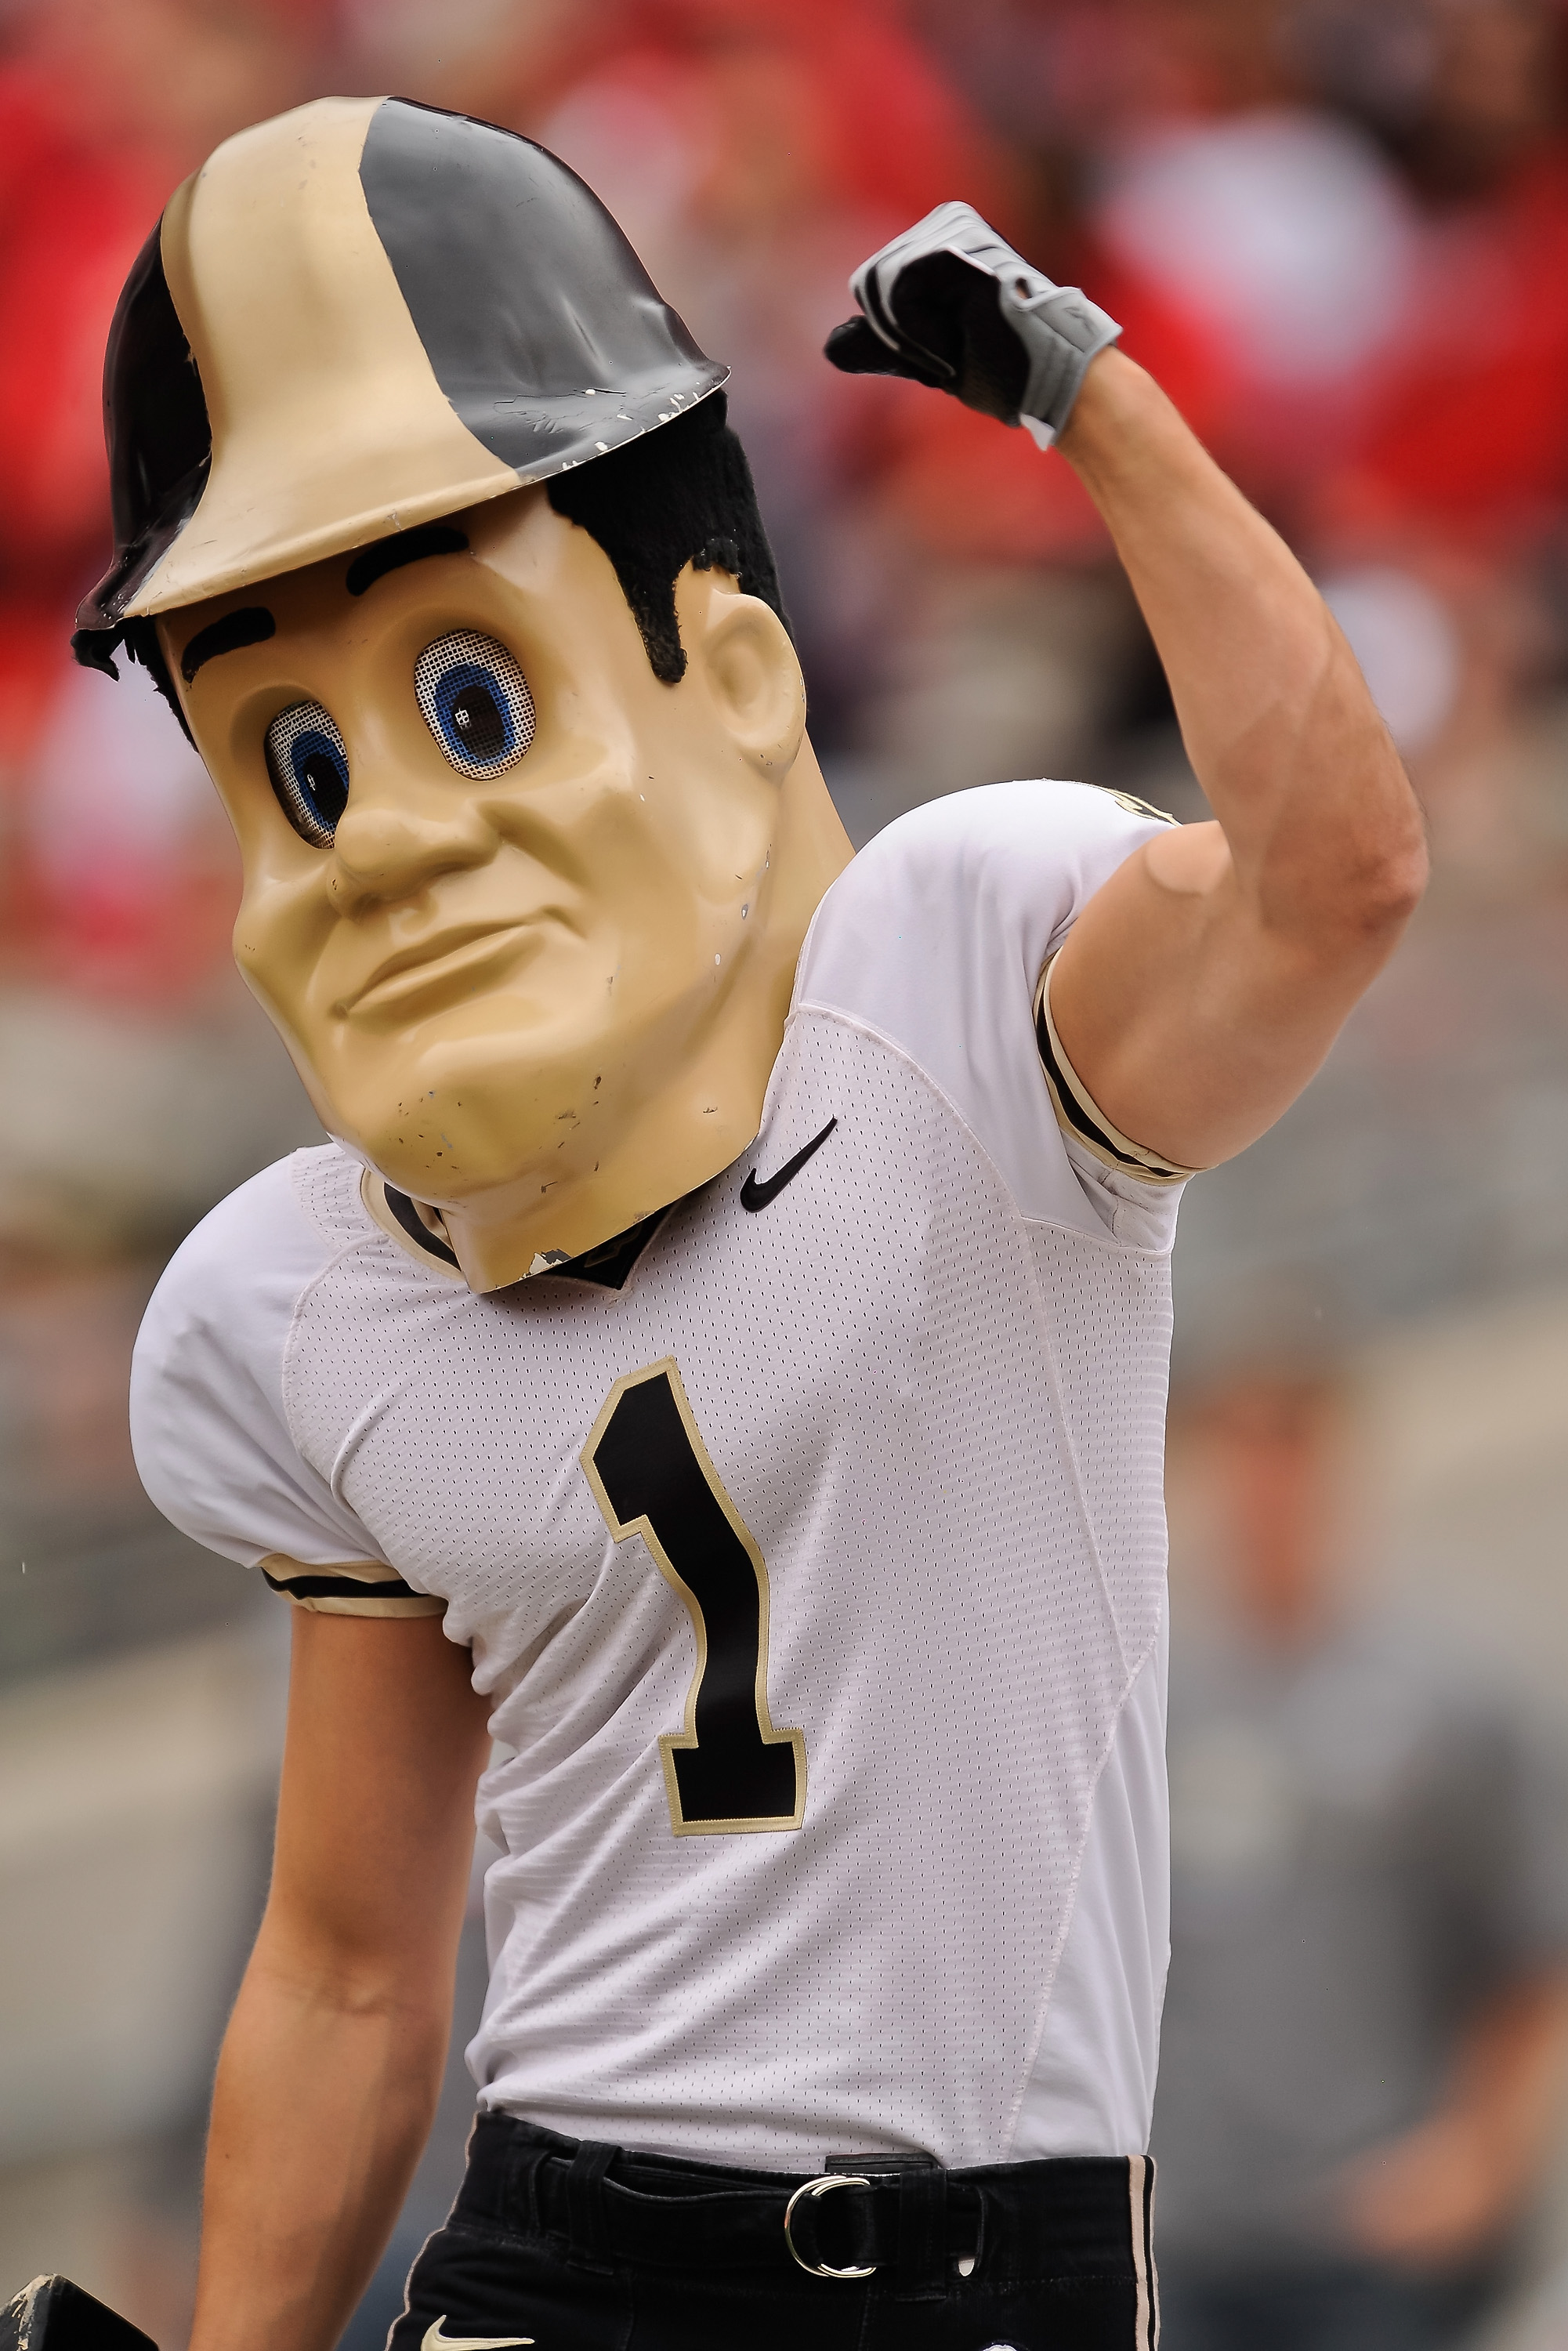 COLUMBUS, OH - OCTOBER 23:  Mascot Purdue Pete of the Purdue Boilermakers cheers on his team against the Ohio State Buckeyes at Ohio Stadium on October 23, 2010 in Columbus, Ohio.  (Photo by Jamie Sabau/Getty Images)